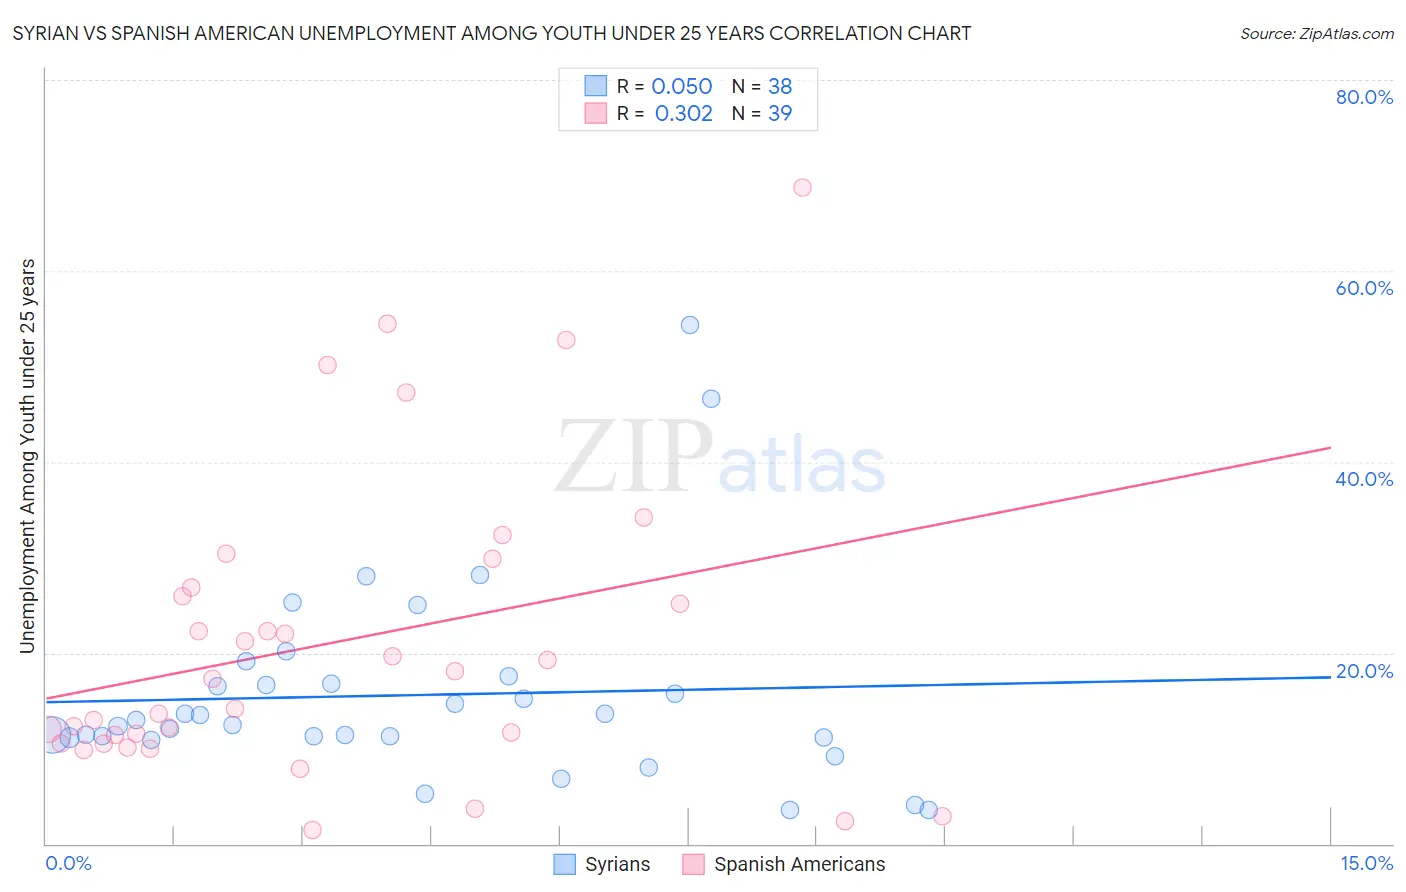 Syrian vs Spanish American Unemployment Among Youth under 25 years